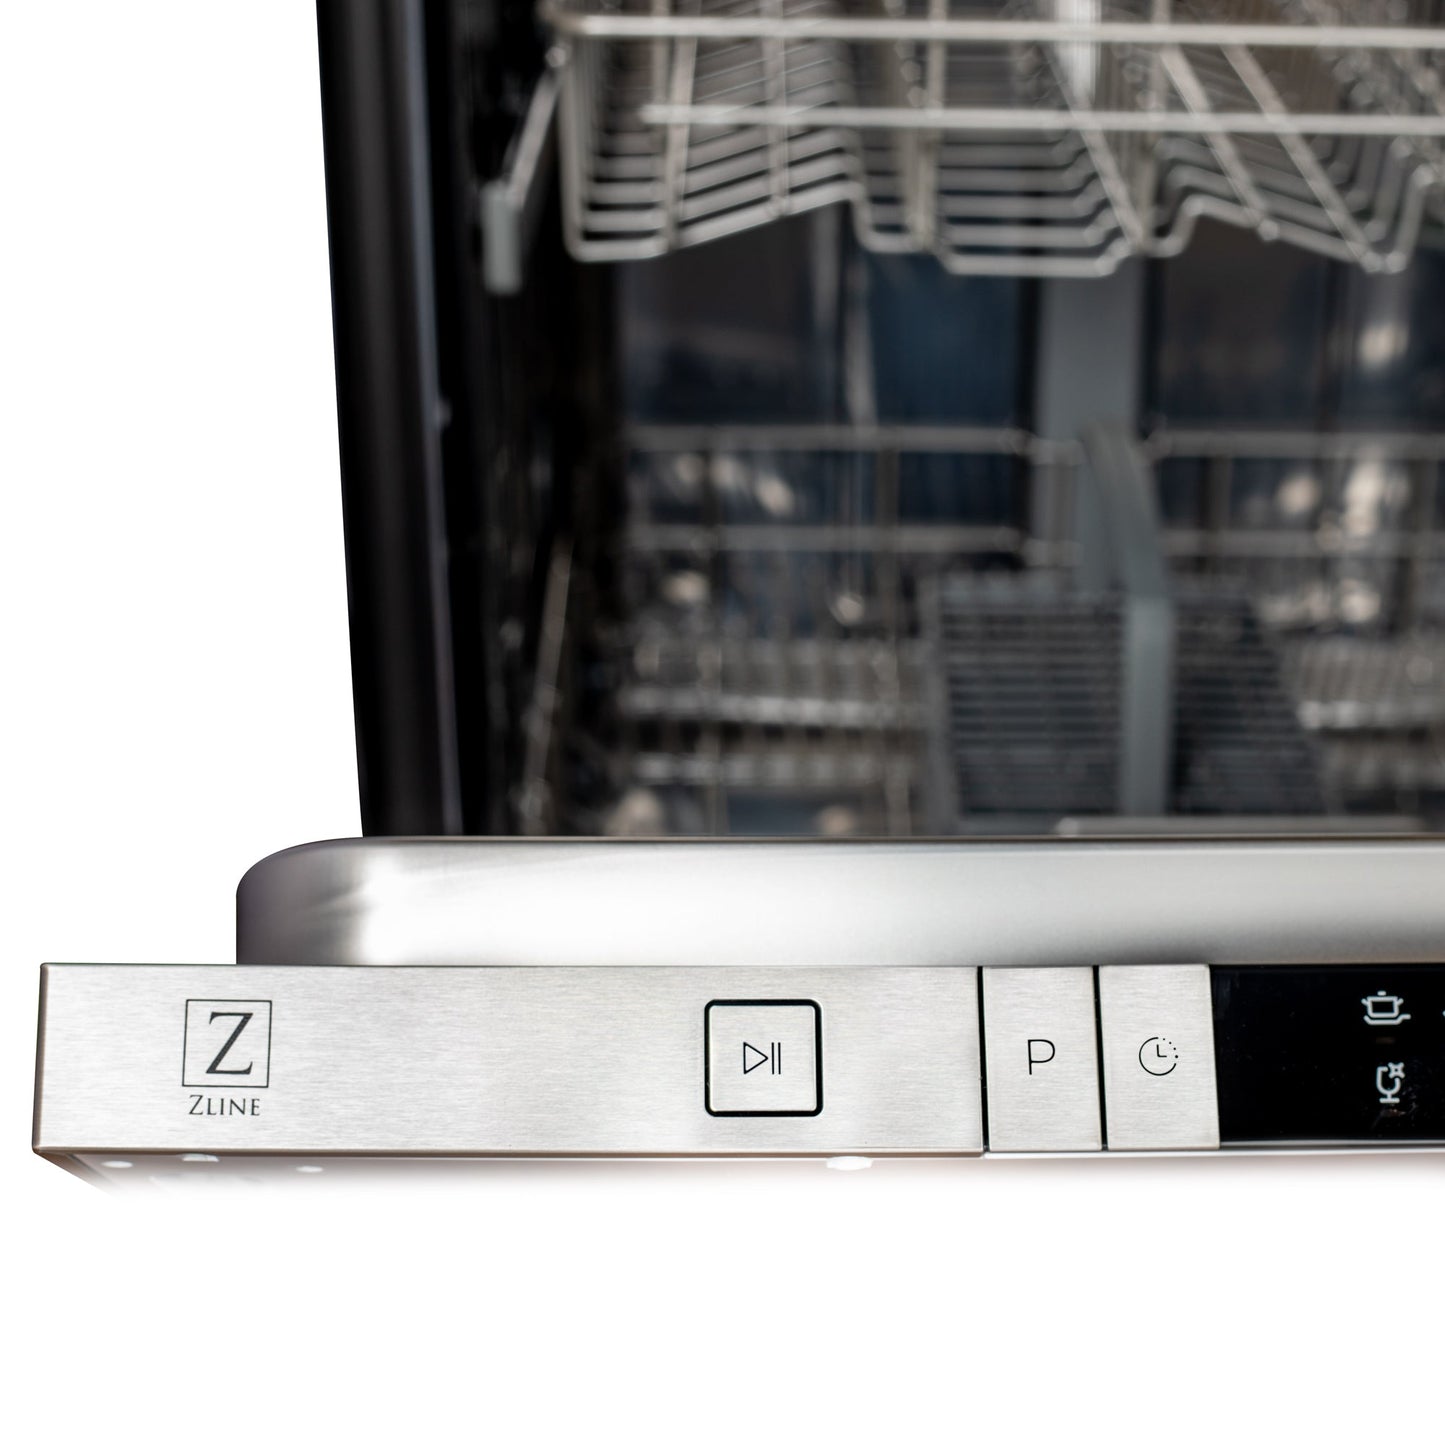 ZLINE 24 in. Top Control Dishwasher with Red Gloss Panel and Modern Style Handle, 52dBa (DW-RG-H-24)